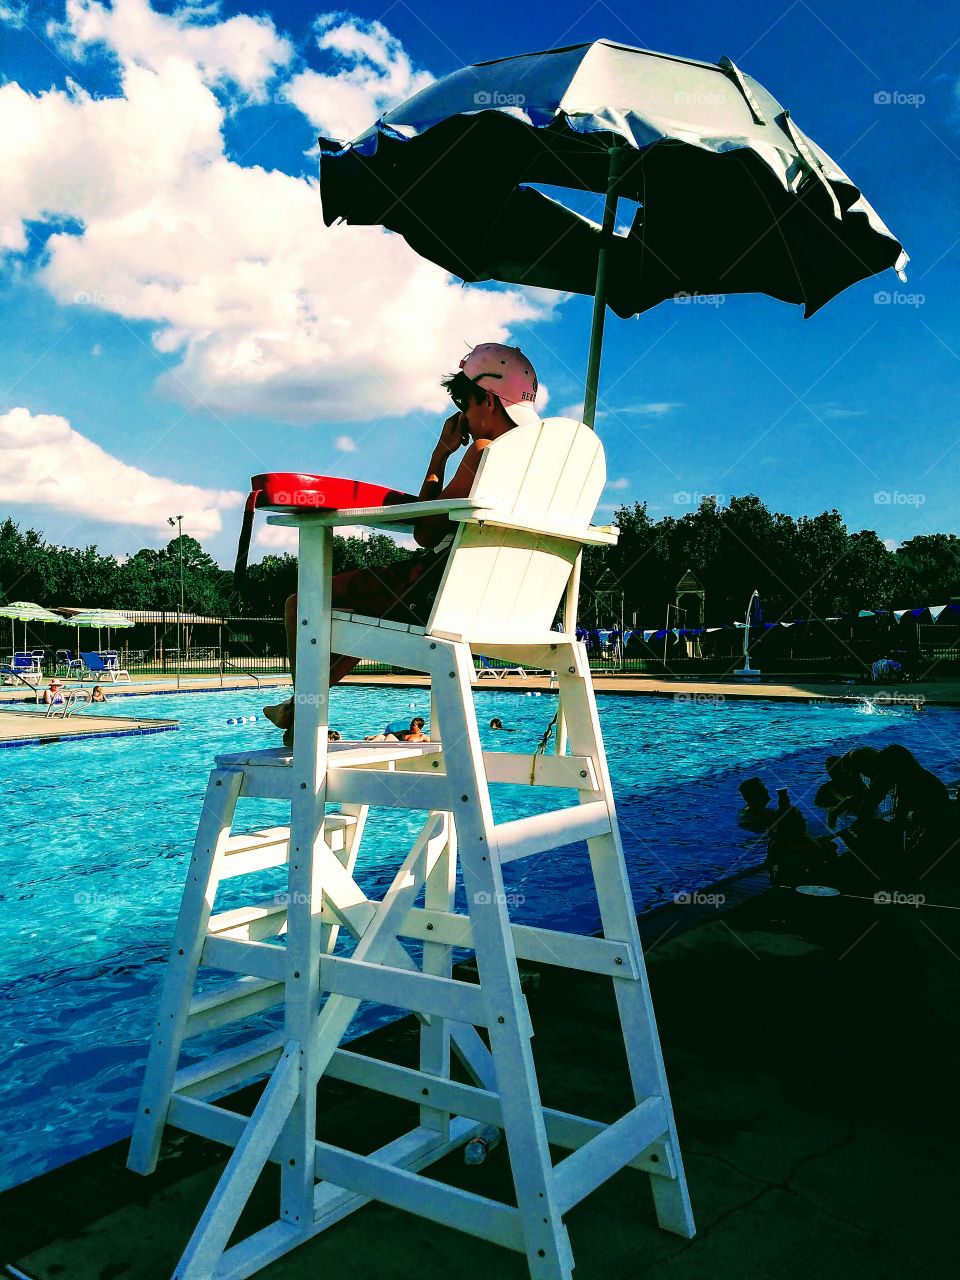 Lifeguard supervising children swimming at the pool.